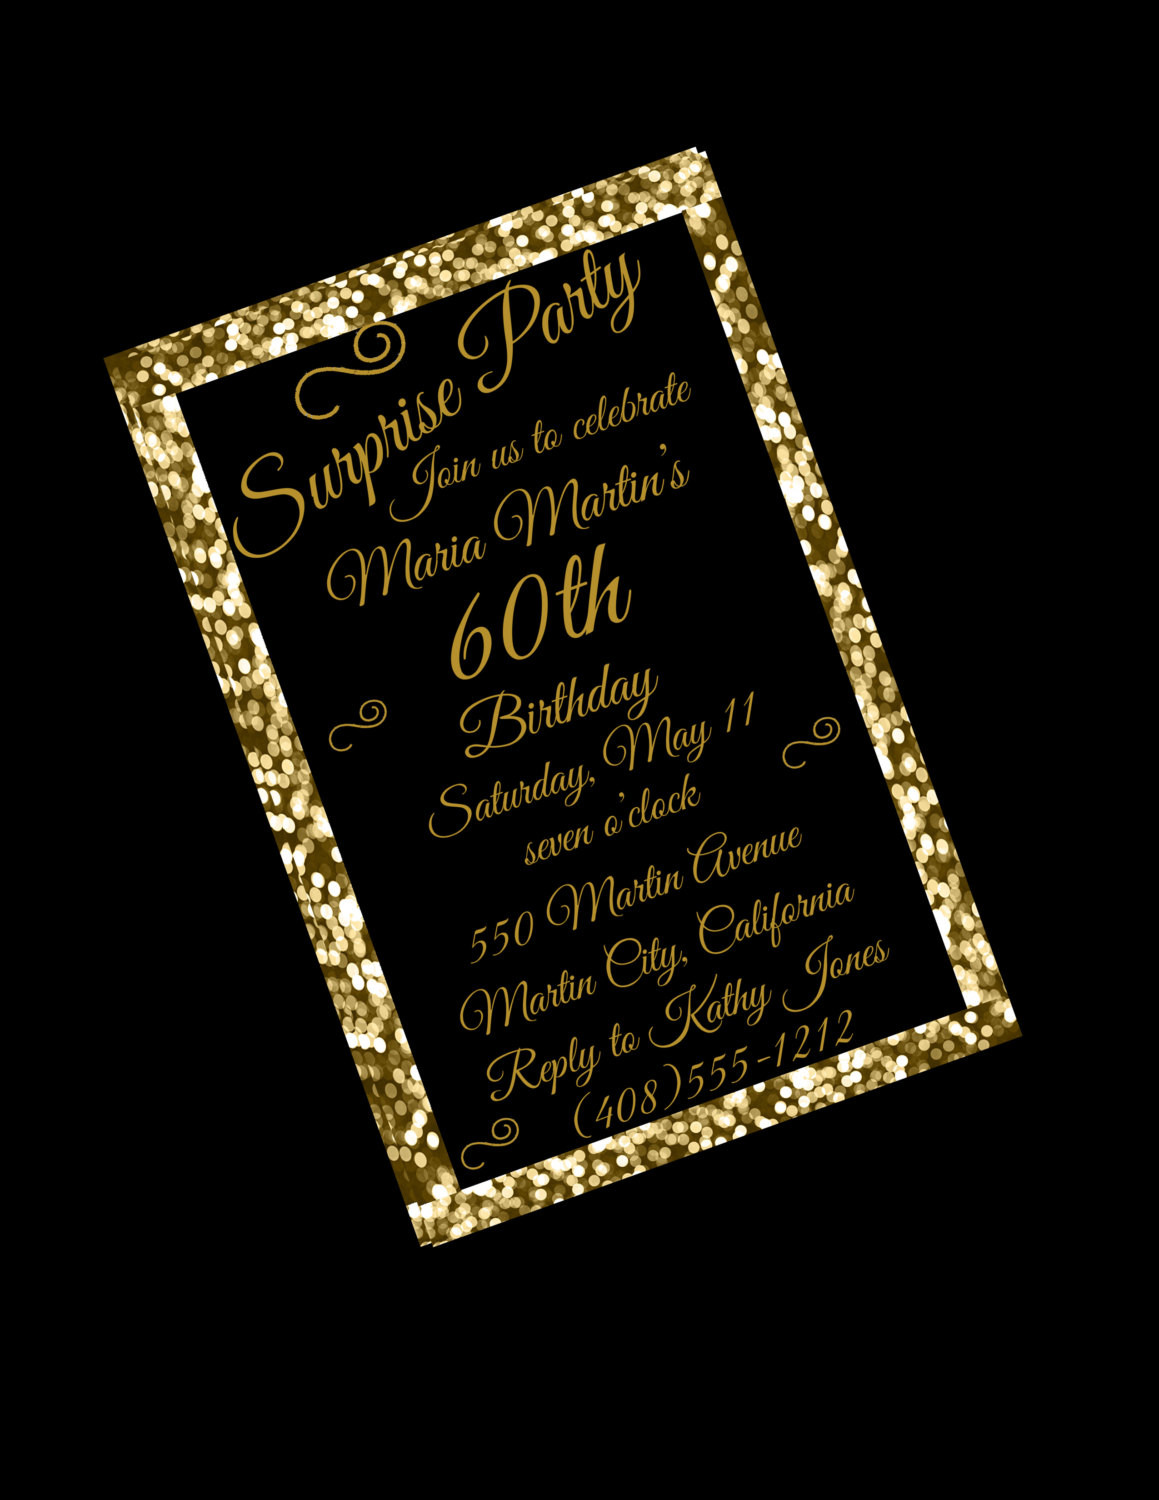 Surprise 60th Birthday Party Invitations
 60th Birthday Invitation 60th Birthday Party 60th Surprise